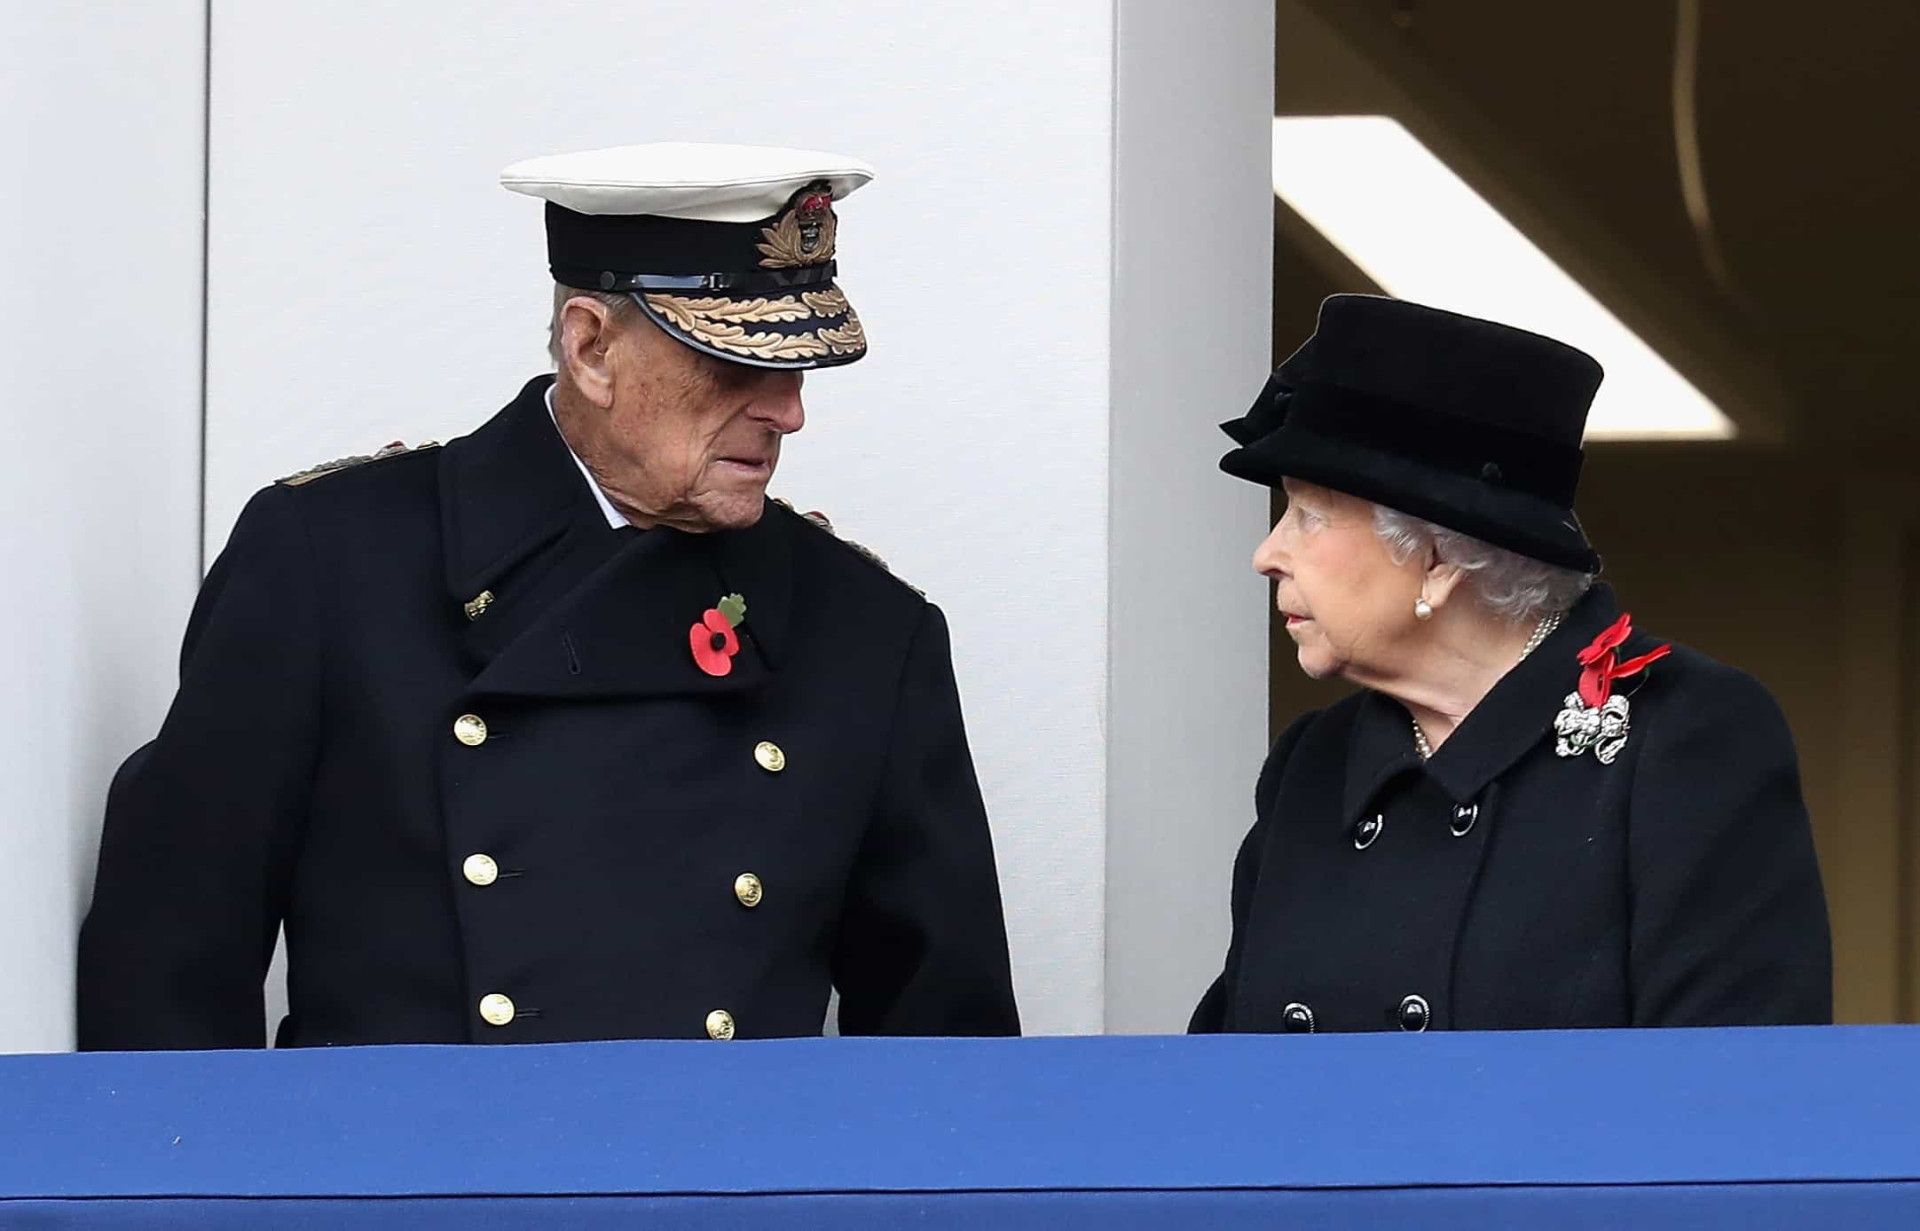 Prince Philip, Duke of Edinburgh and Queen Elizabeth II at the Remembrance Sunday memorial near The Cenotaph in London.<p>You may also like:<a href="https://www.starsinsider.com/n/500768?utm_source=msn.com&utm_medium=display&utm_campaign=referral_description&utm_content=705778en-za"> Are we facing an insect apocalypse?</a></p>